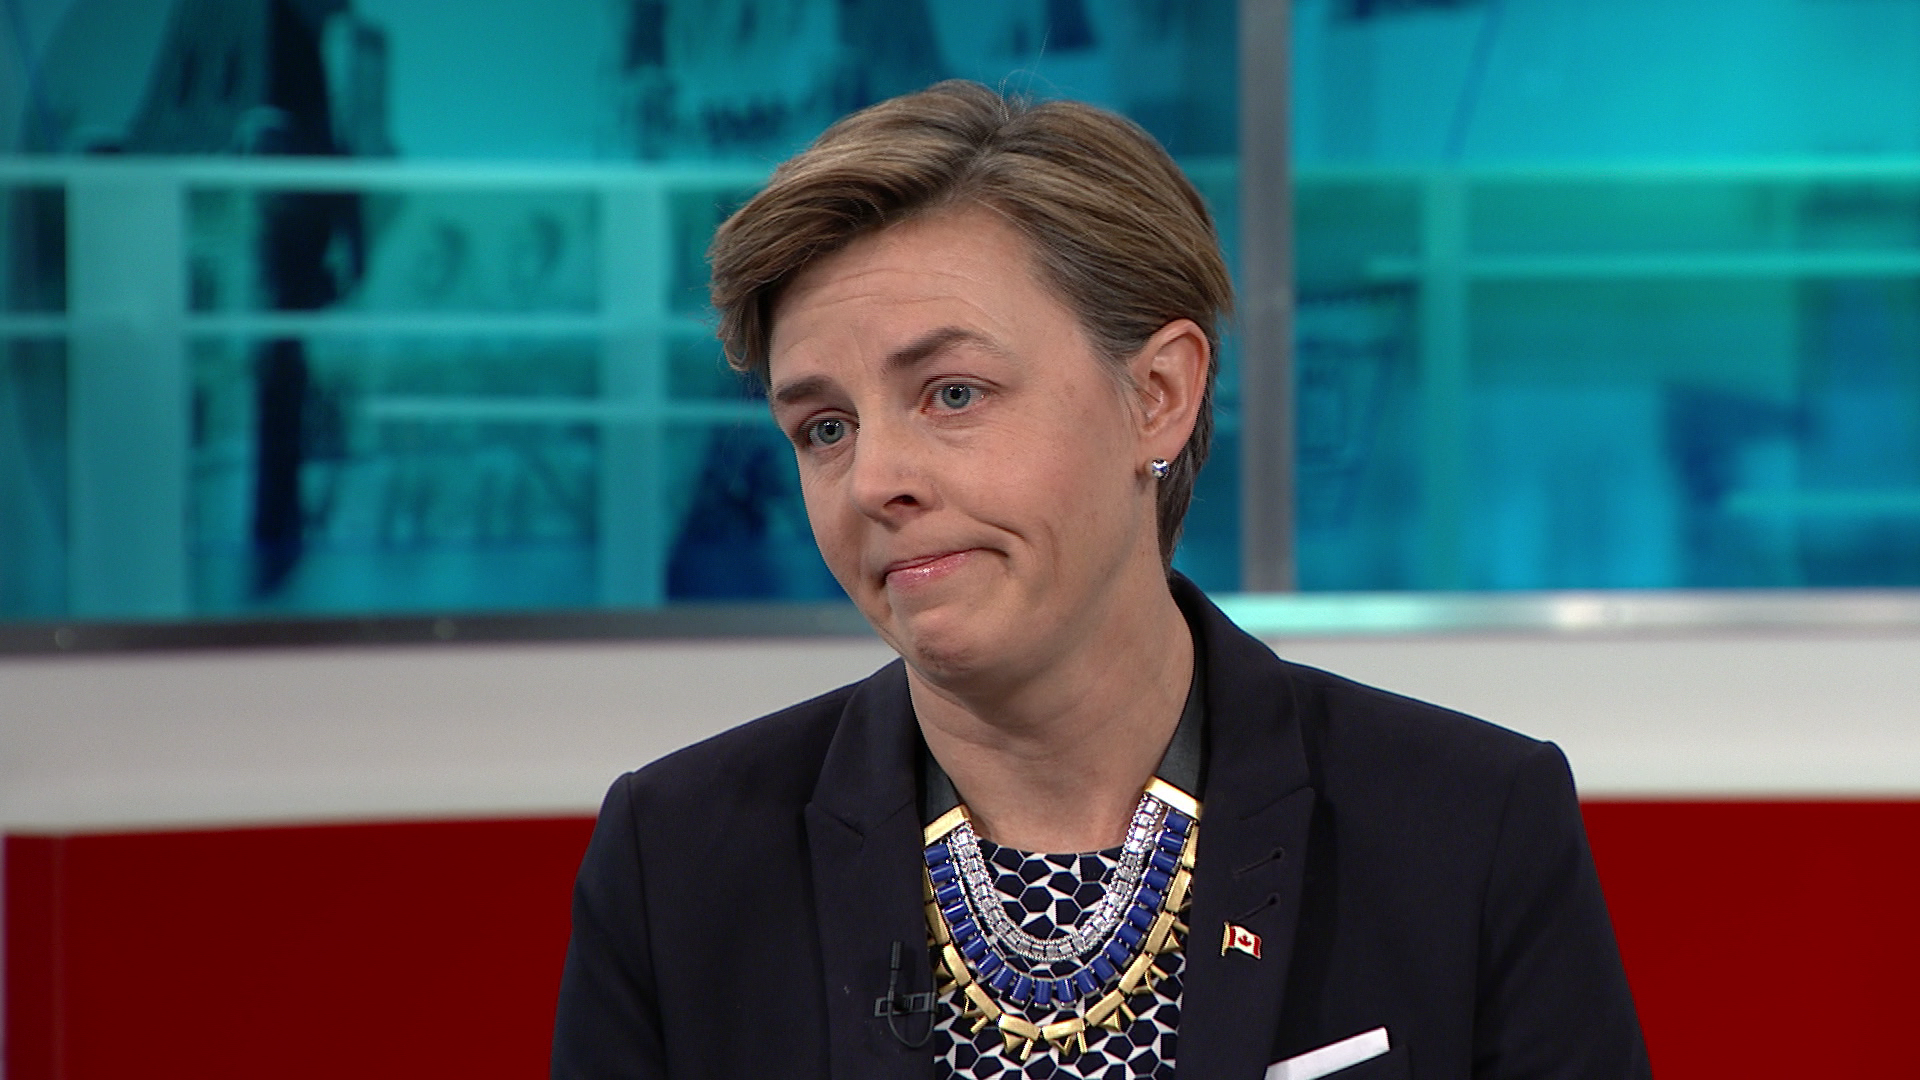 Kellie Leitch has gone Viral